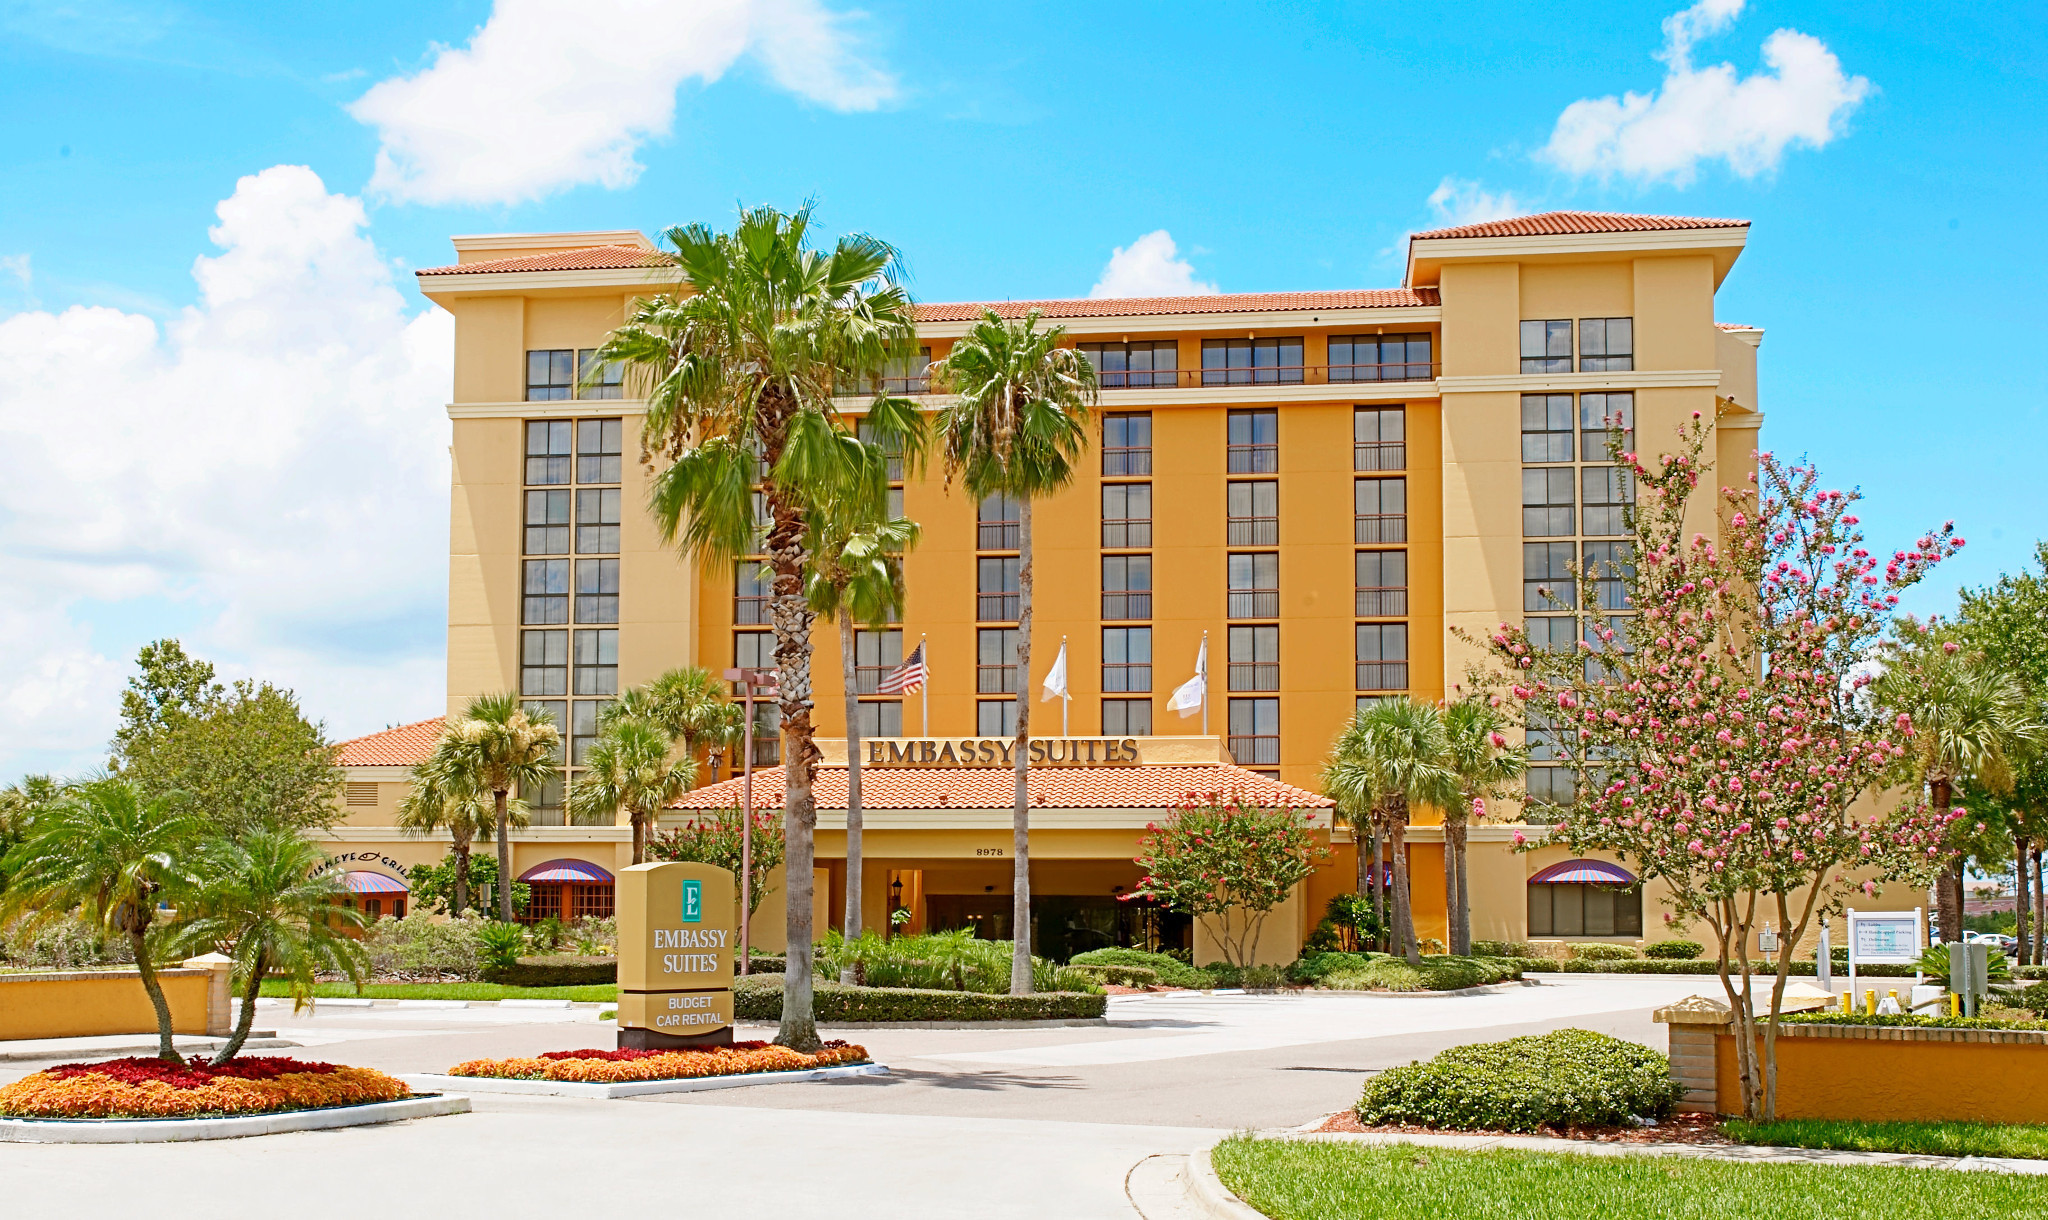 Embassy Suites Hotel Exterior Editorial Image - Image of traveller, sign:  90973755